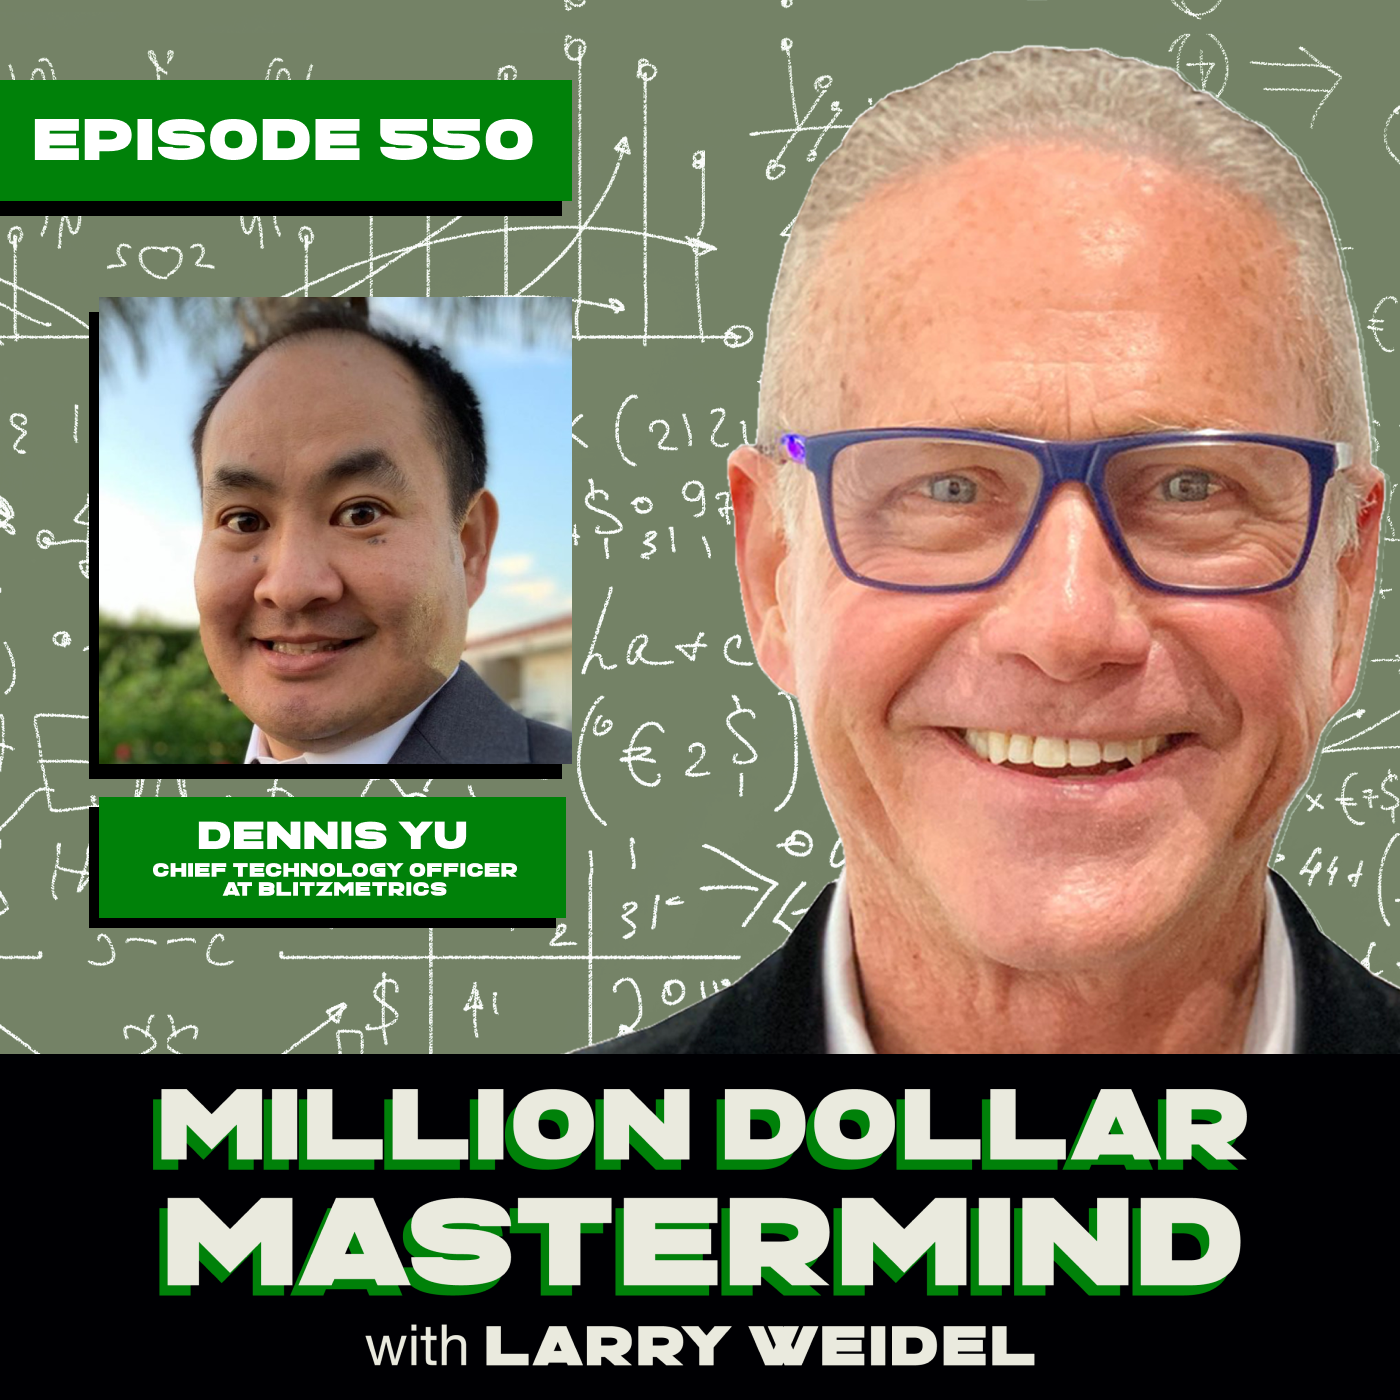 Episode #550 - Moving In The Right Direction with Dennis Yu